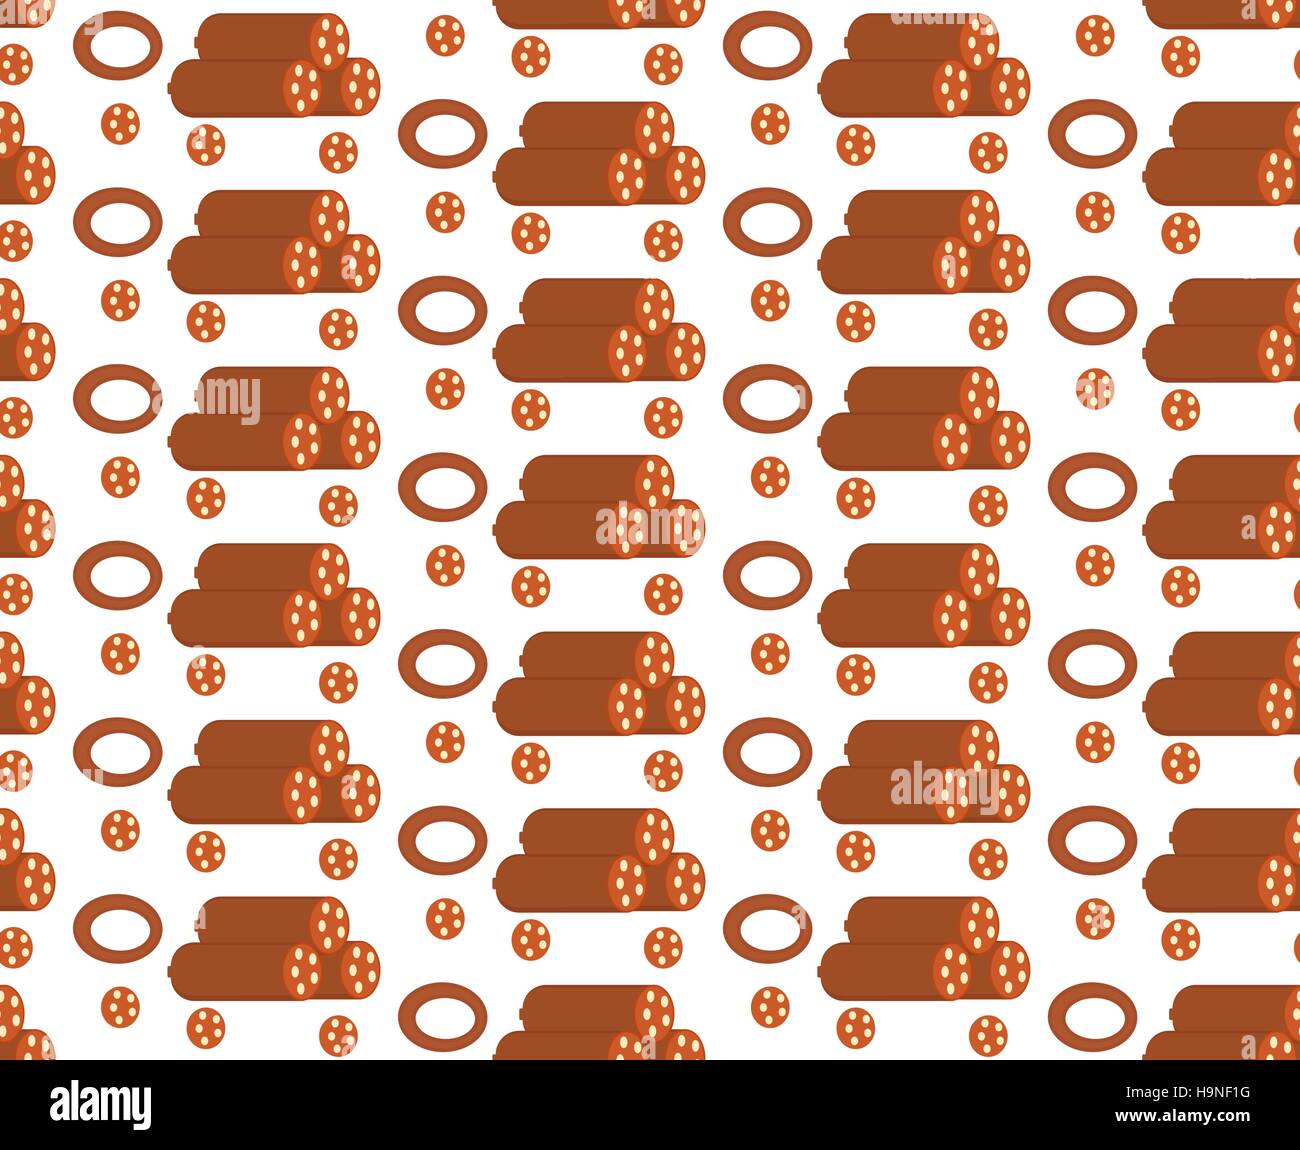 Salami seamless pattern, flat style. Sausage endless background, texture. Vector illustration. Stock Vector